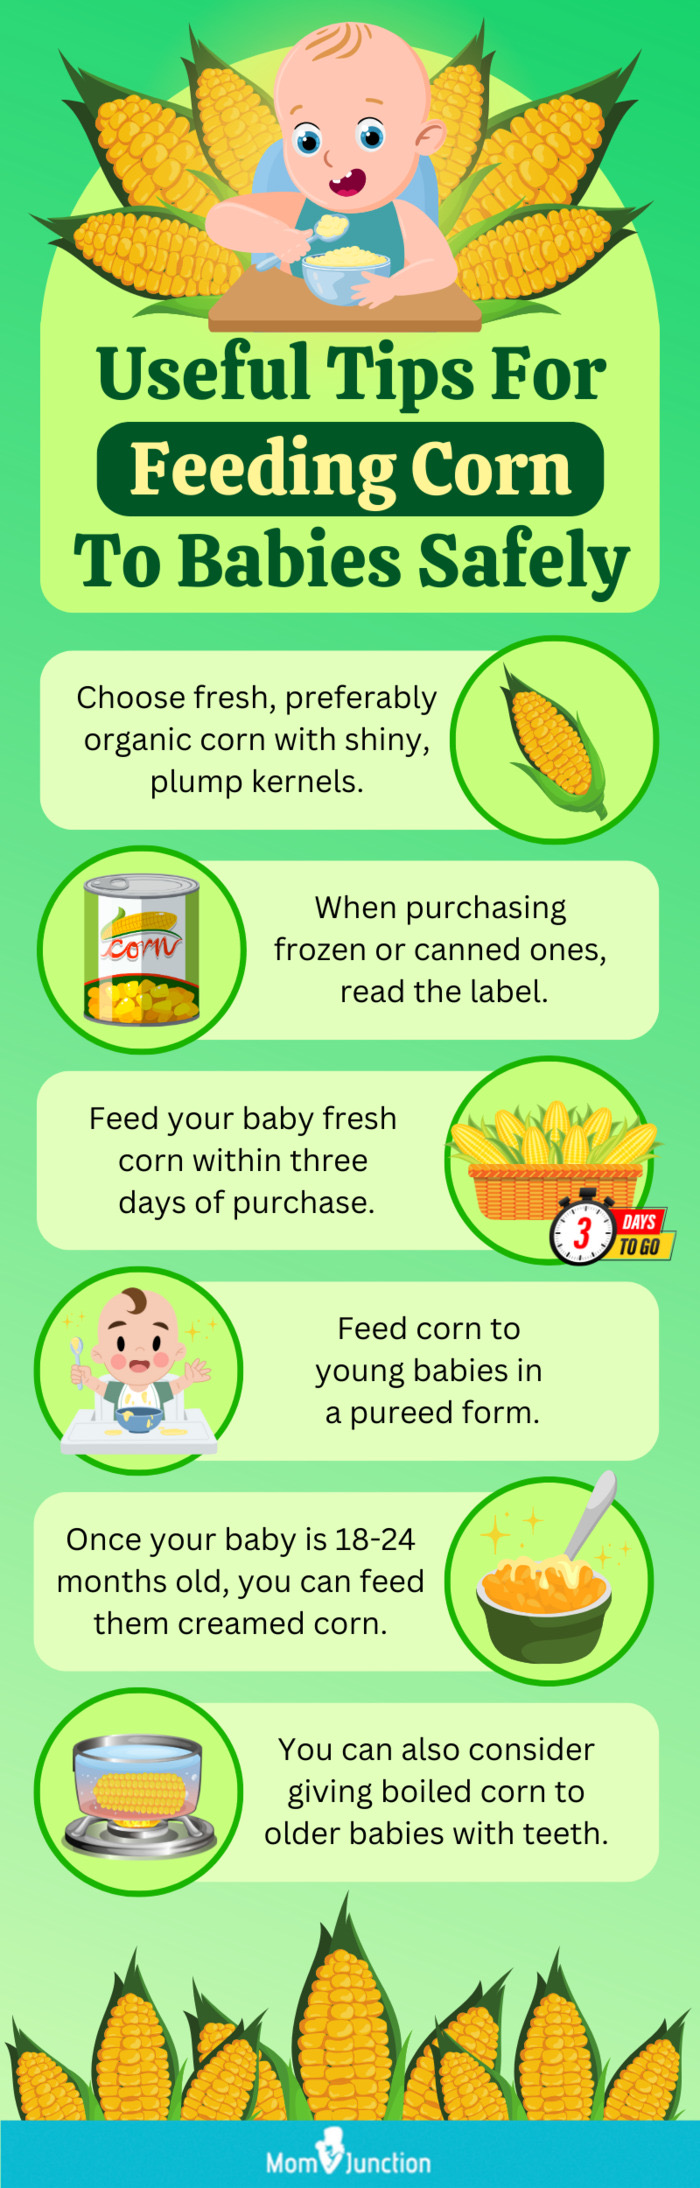 useful tips for feeding corn to babies safely [infographic]